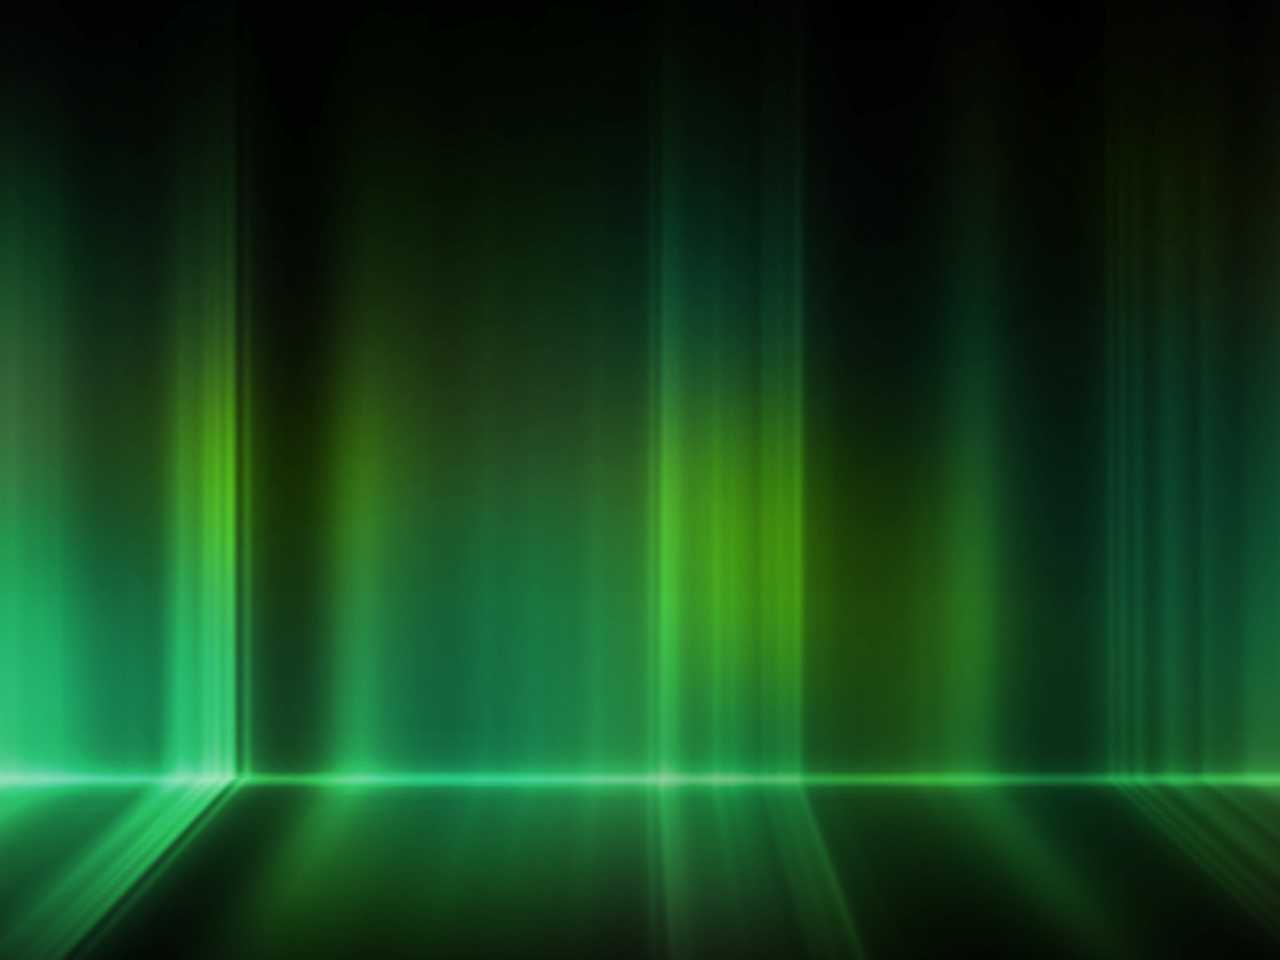 Dark Abstract Backgrounds perfect dark green abstract wallpaper